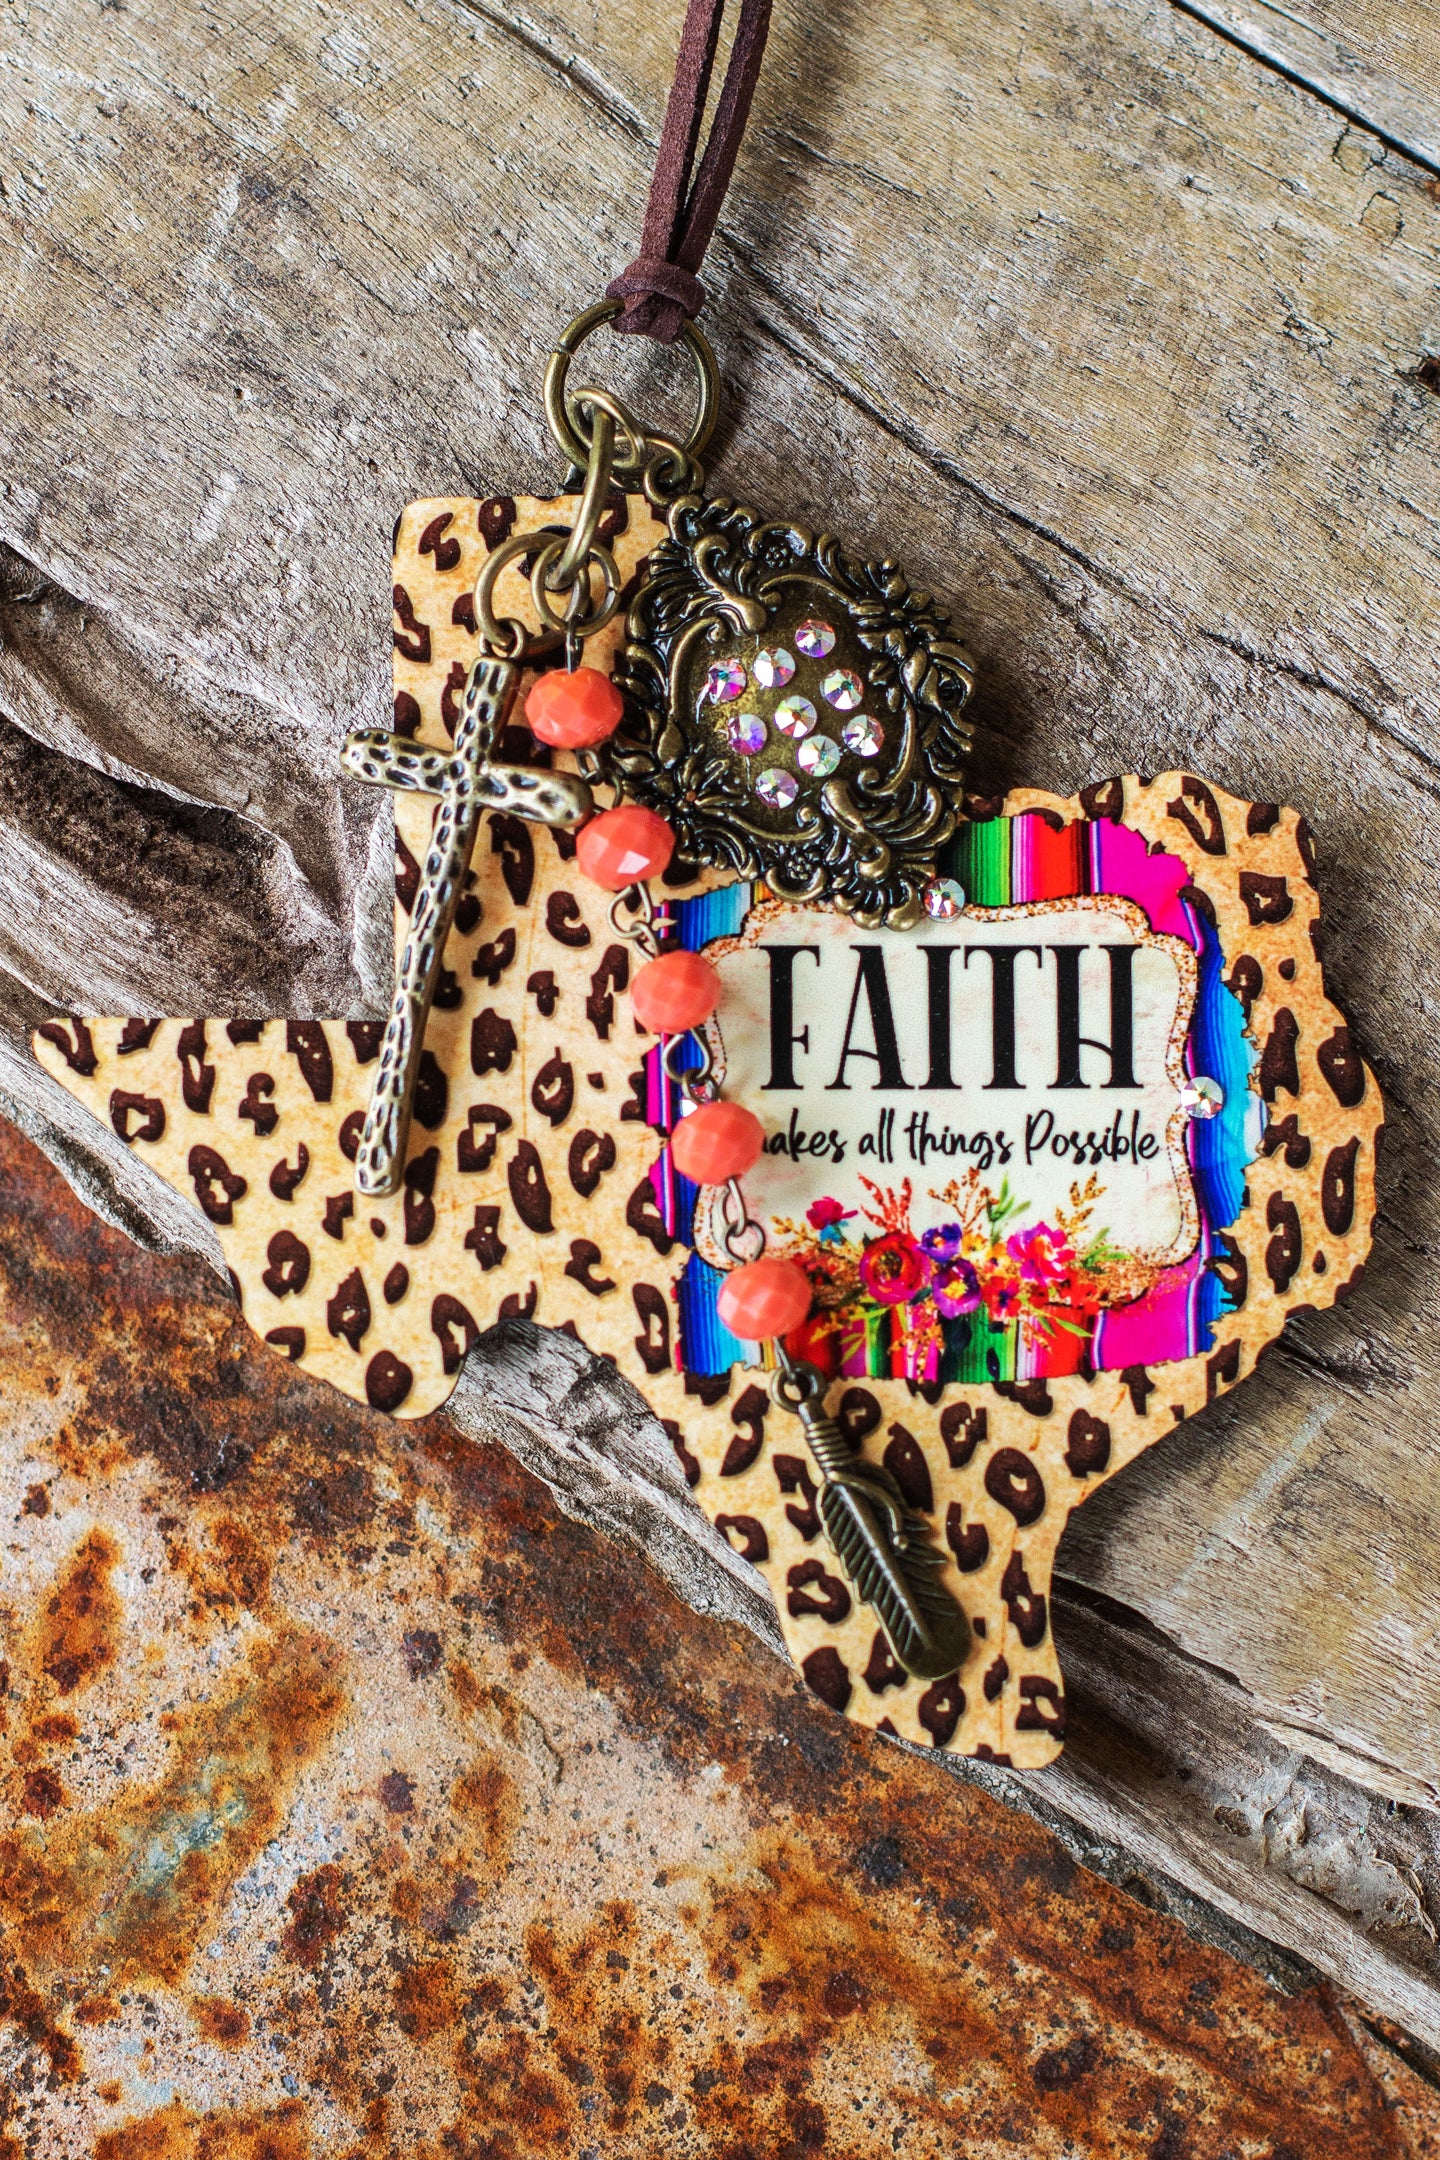 TEXAS...Faith Makes All Things Possible